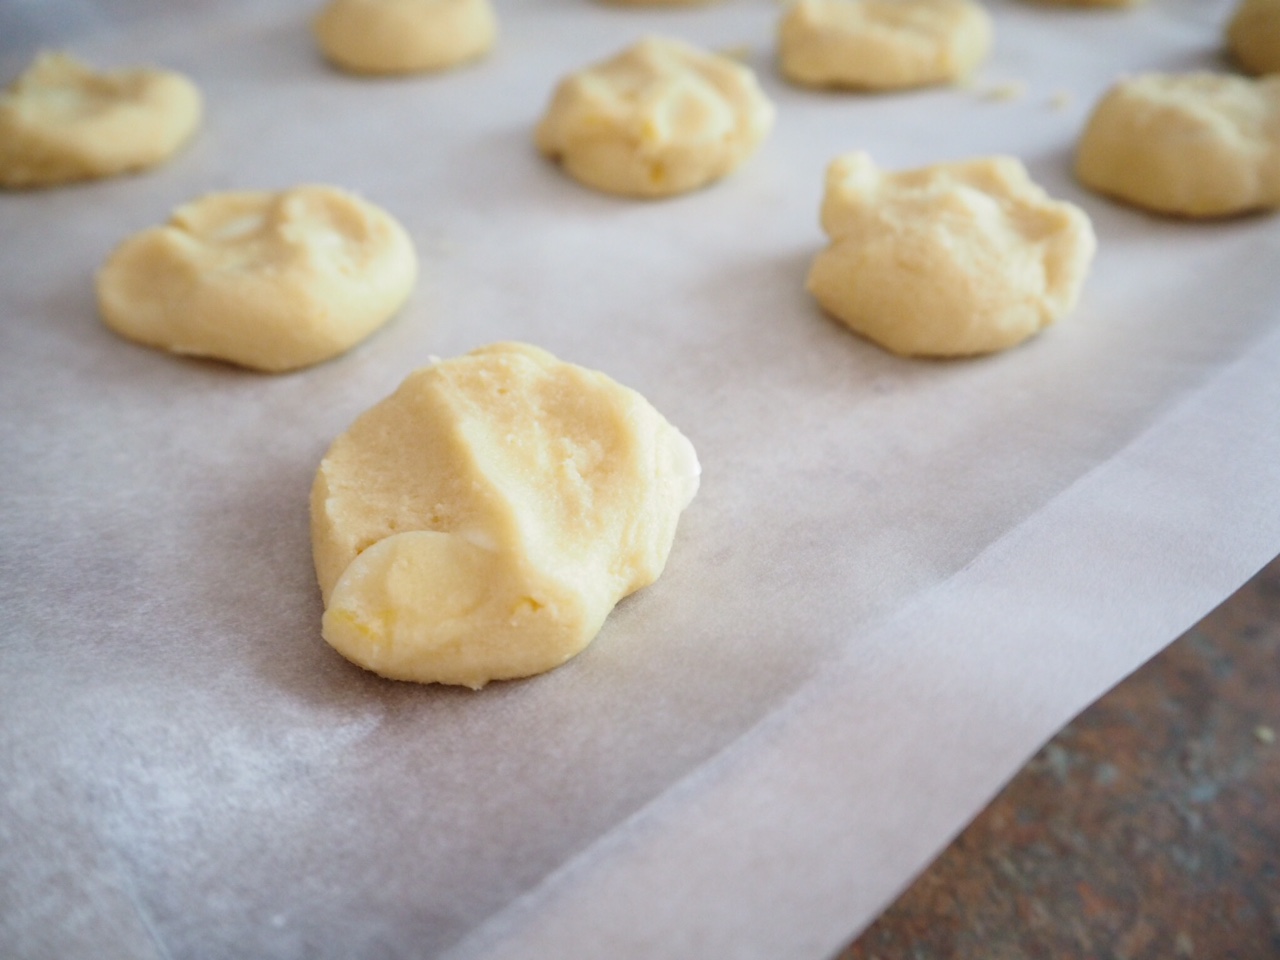 Lemon and White Chocolate Biscuits